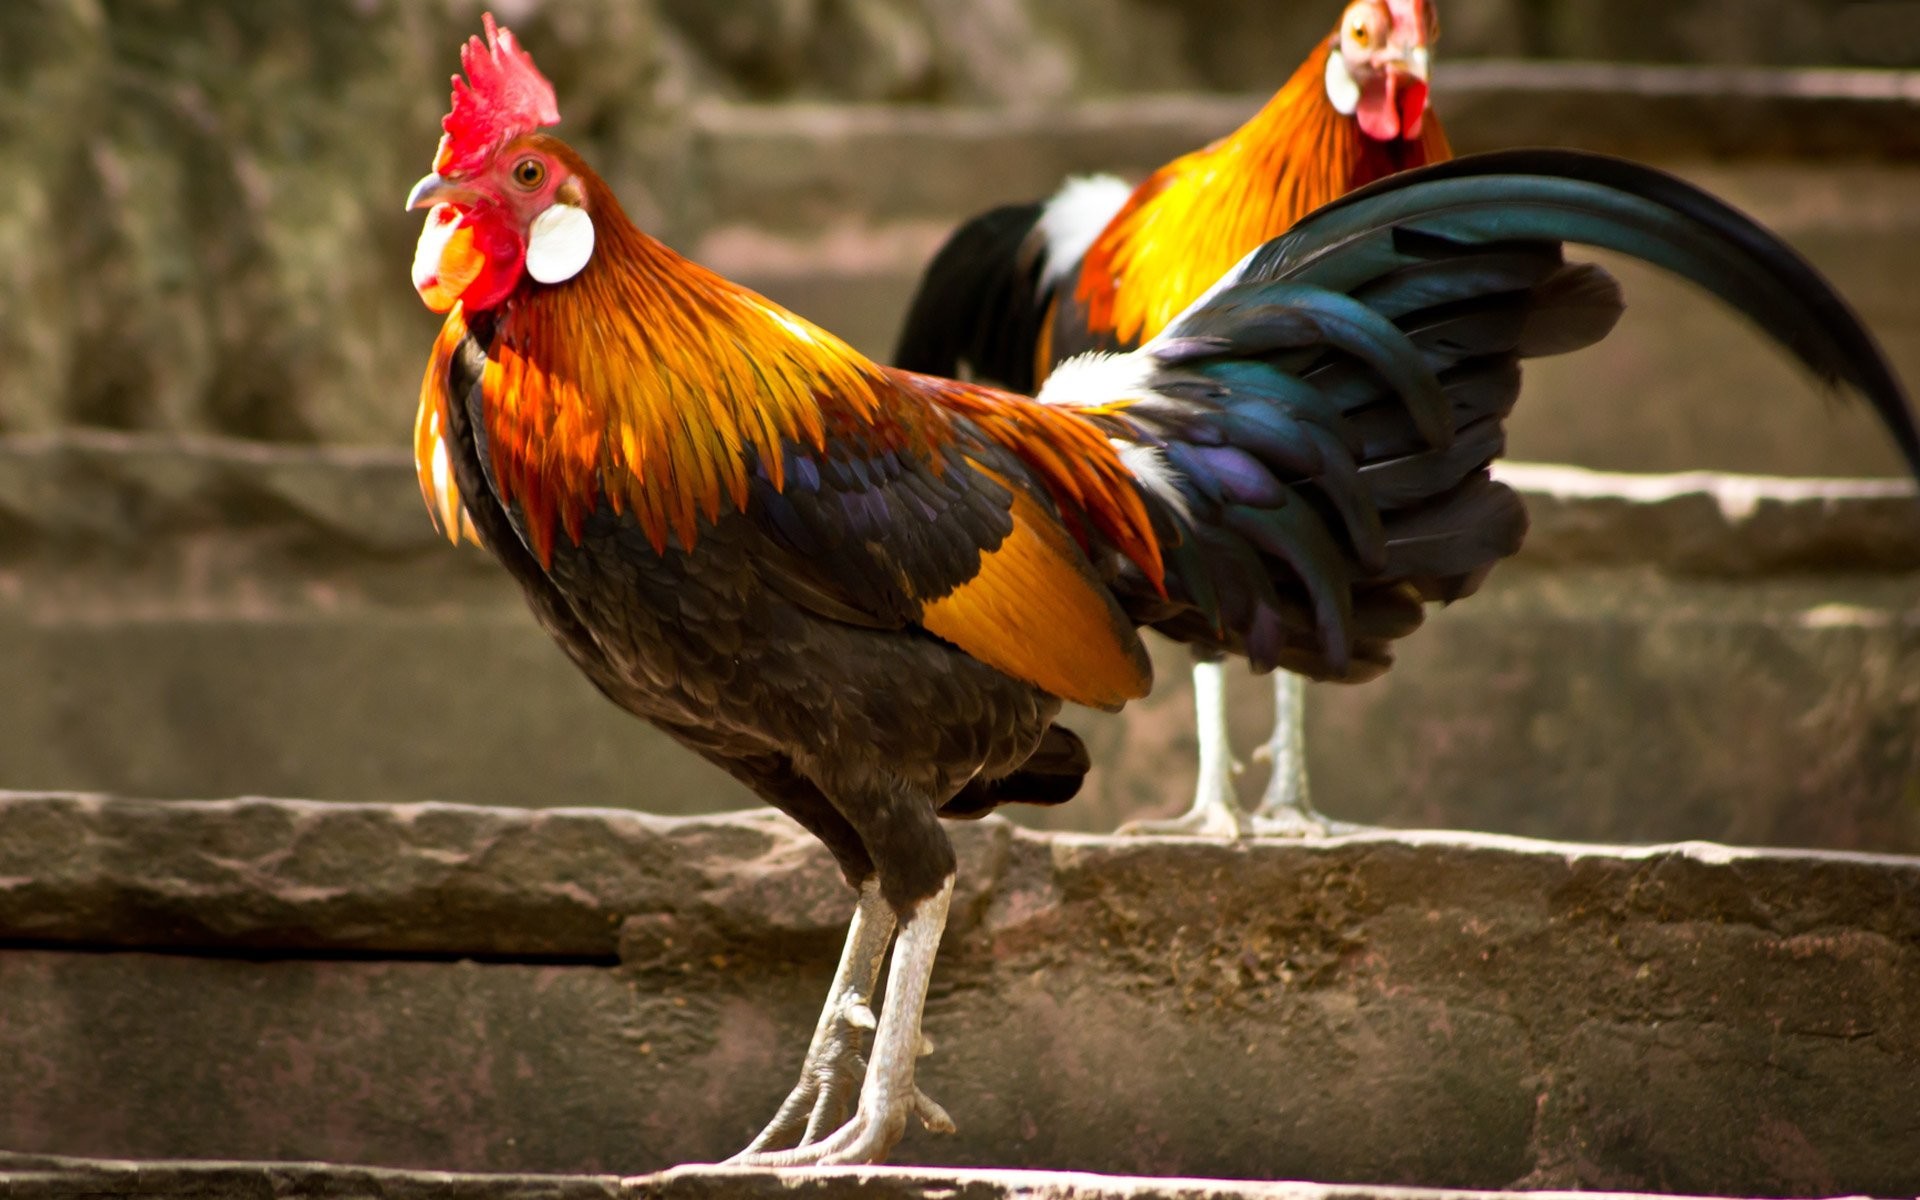 Wallpaper ID 449122  Animal Rooster Phone Wallpaper  720x1280 free  download